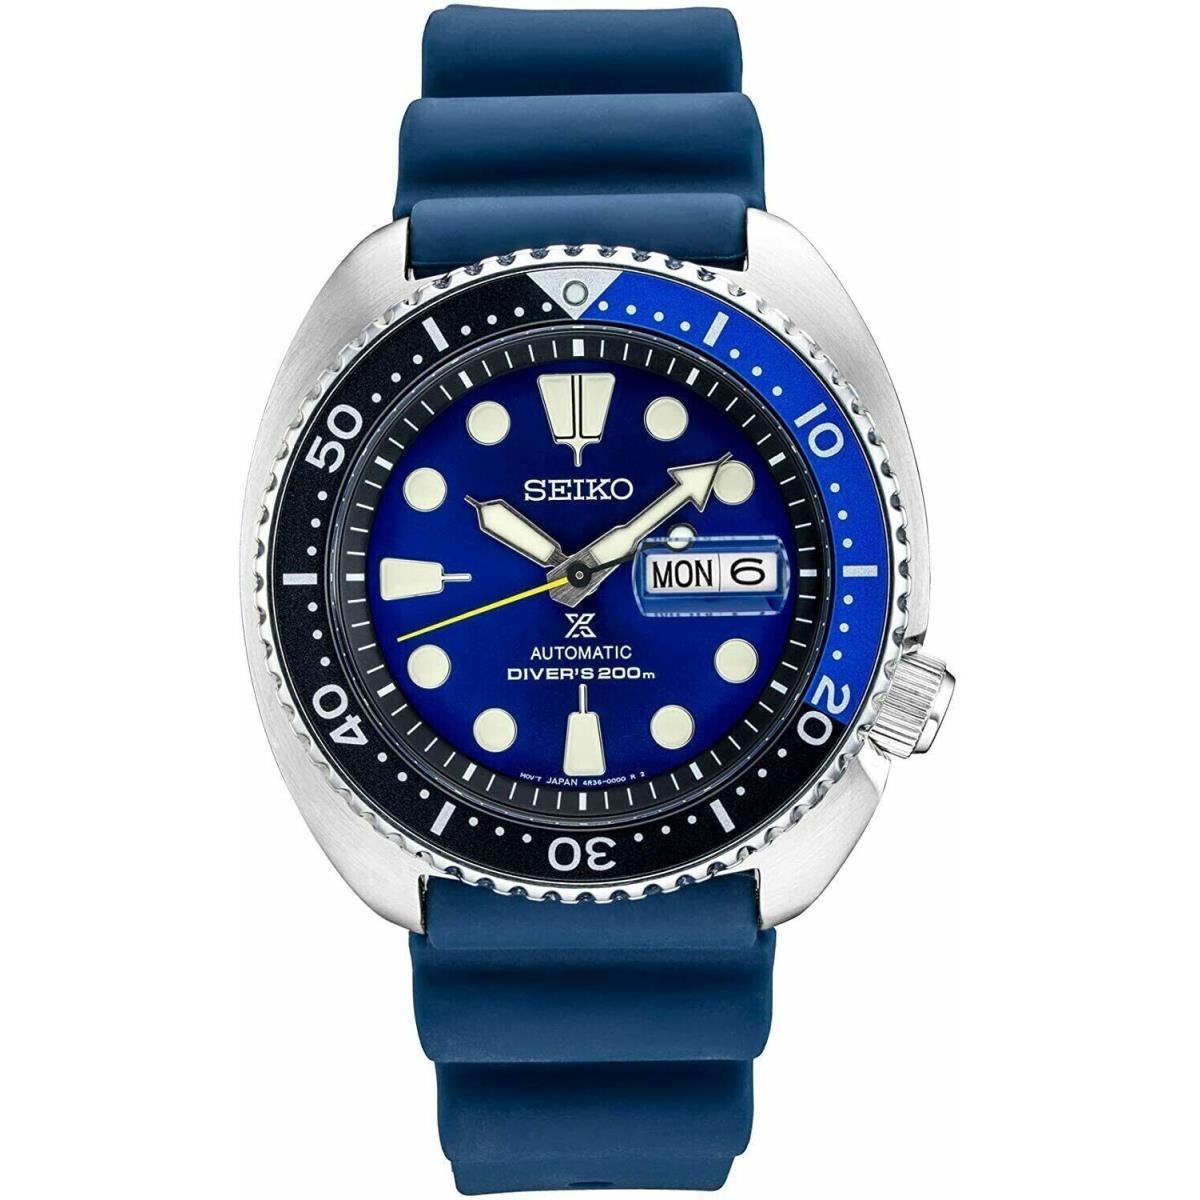 Seiko Turtle Prospex Automatic Dive Watch with Blue Dial and Silcn Strp SRPD43 - Dial: Blue, Band: Blue